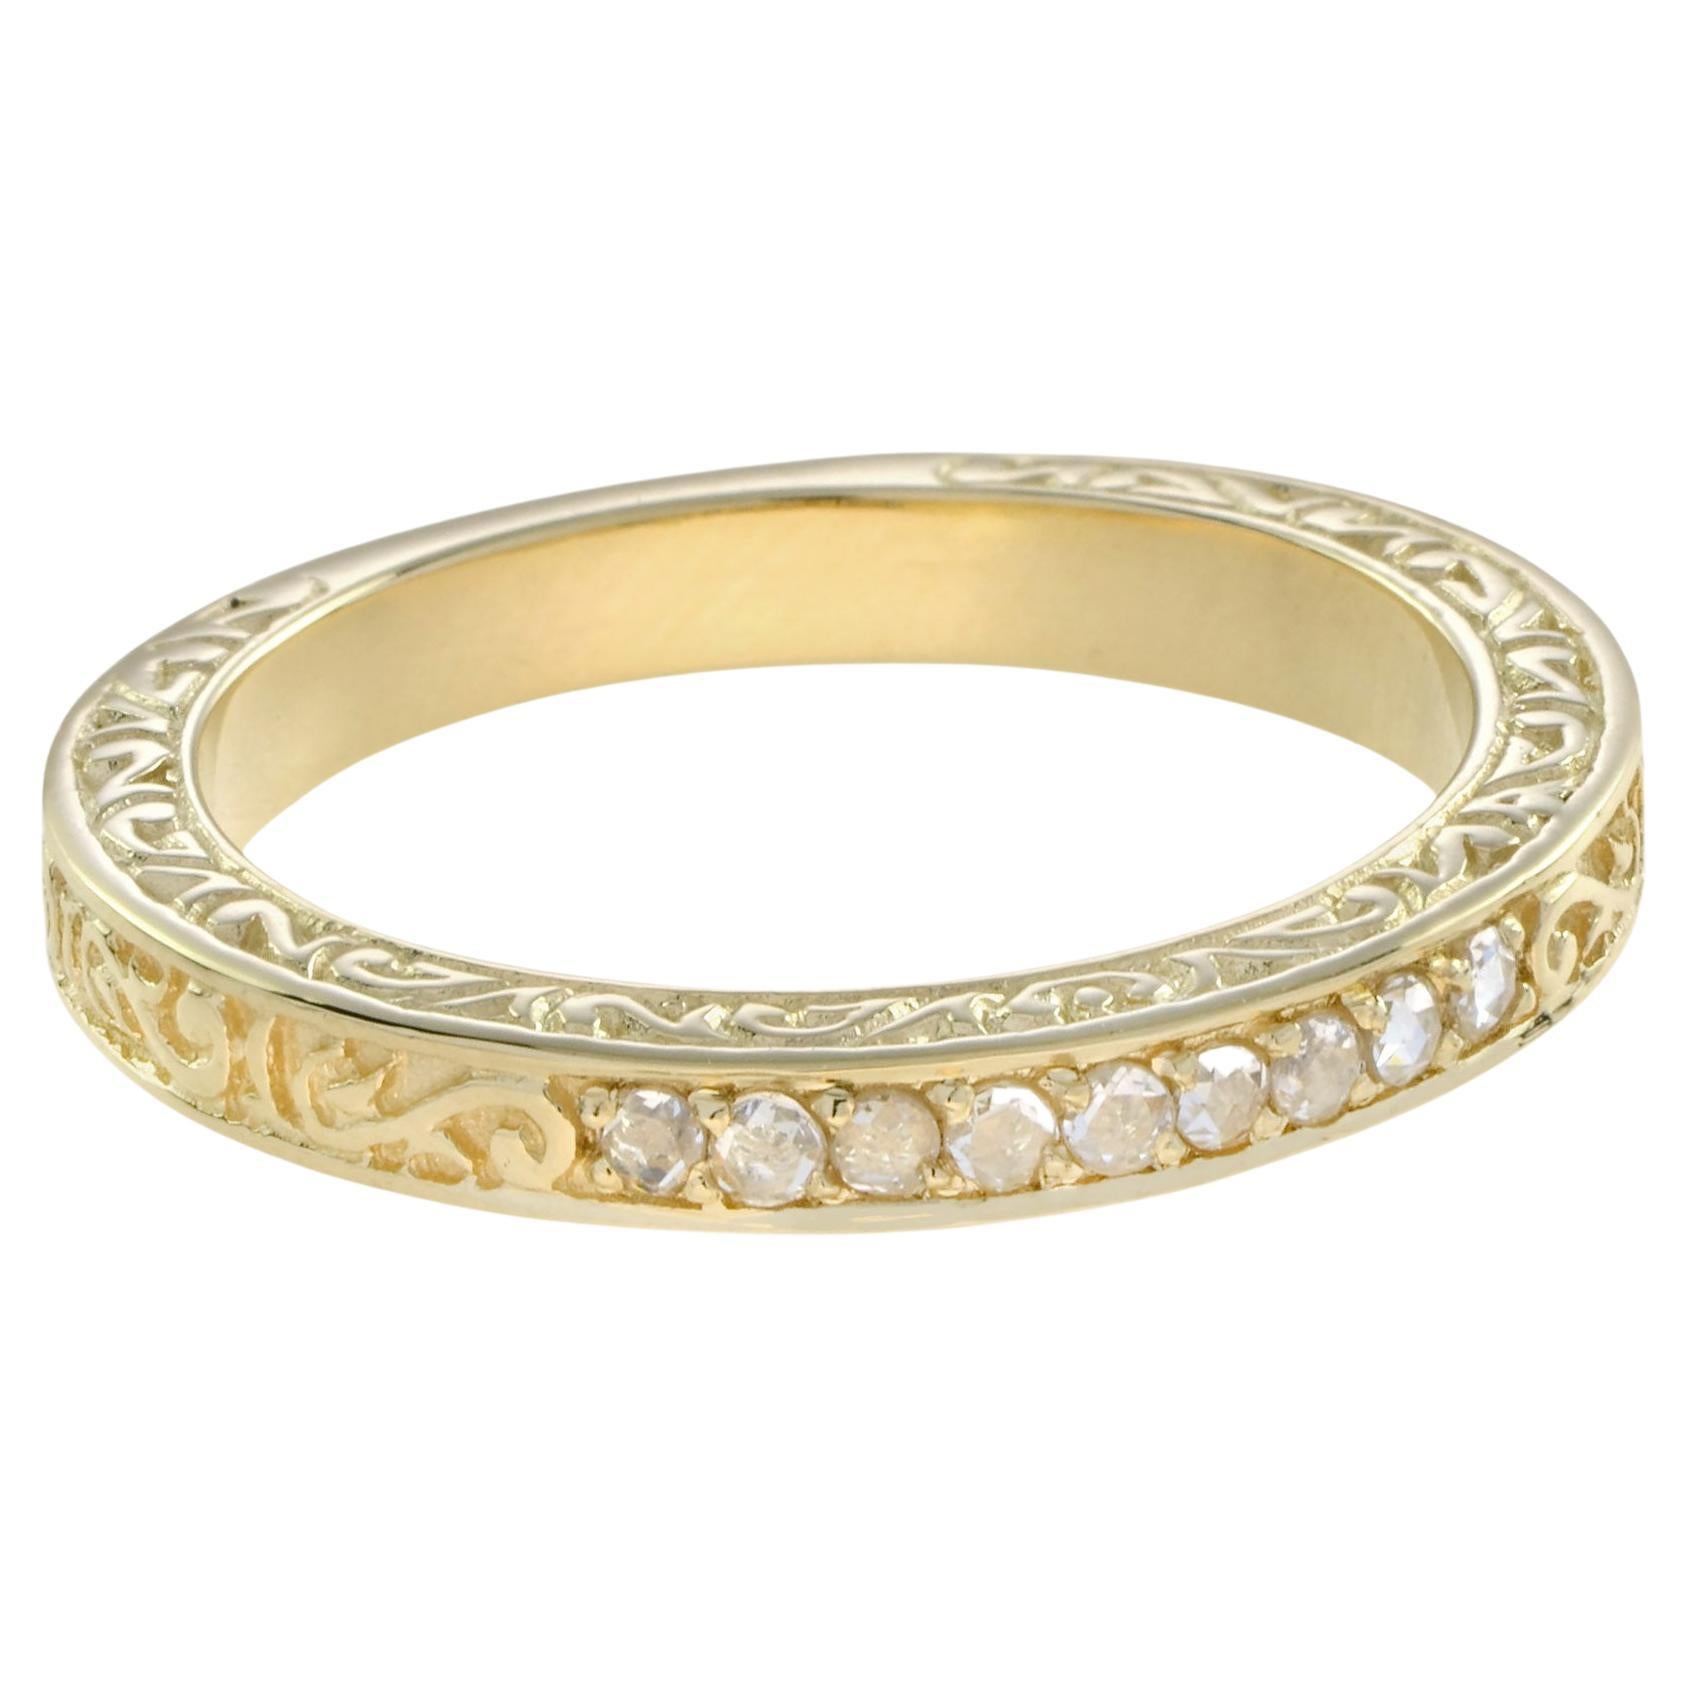 Nine Rose Cut Diamond Vintage Style Band Ring in 14K Yellow Gold